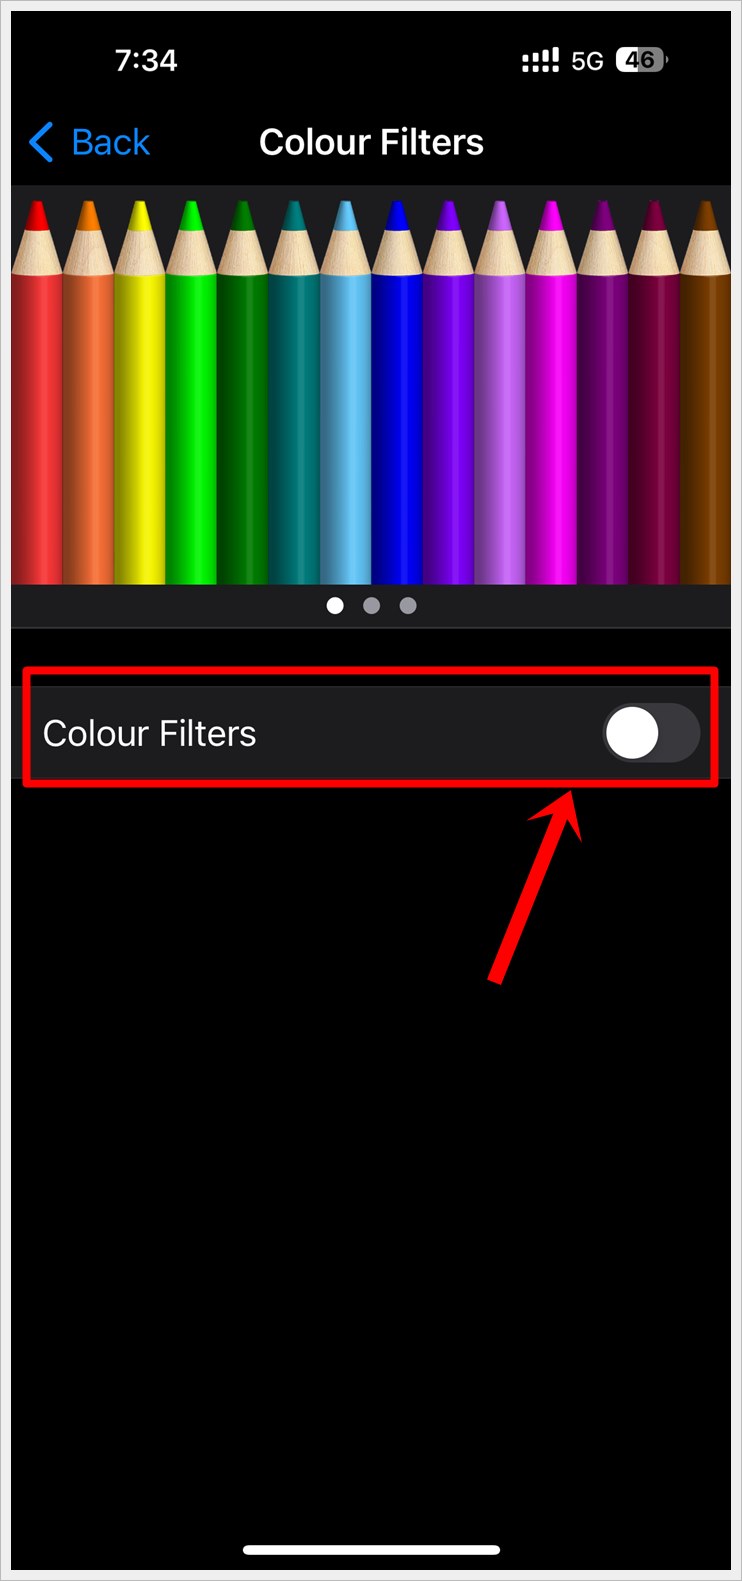 How to Make Your Phone Screen Display in Black and White: This image shows a screenshot of the 'Color Filters' page of an iPhone. The toggle on/off button of 'Color Filters' is highlighted.